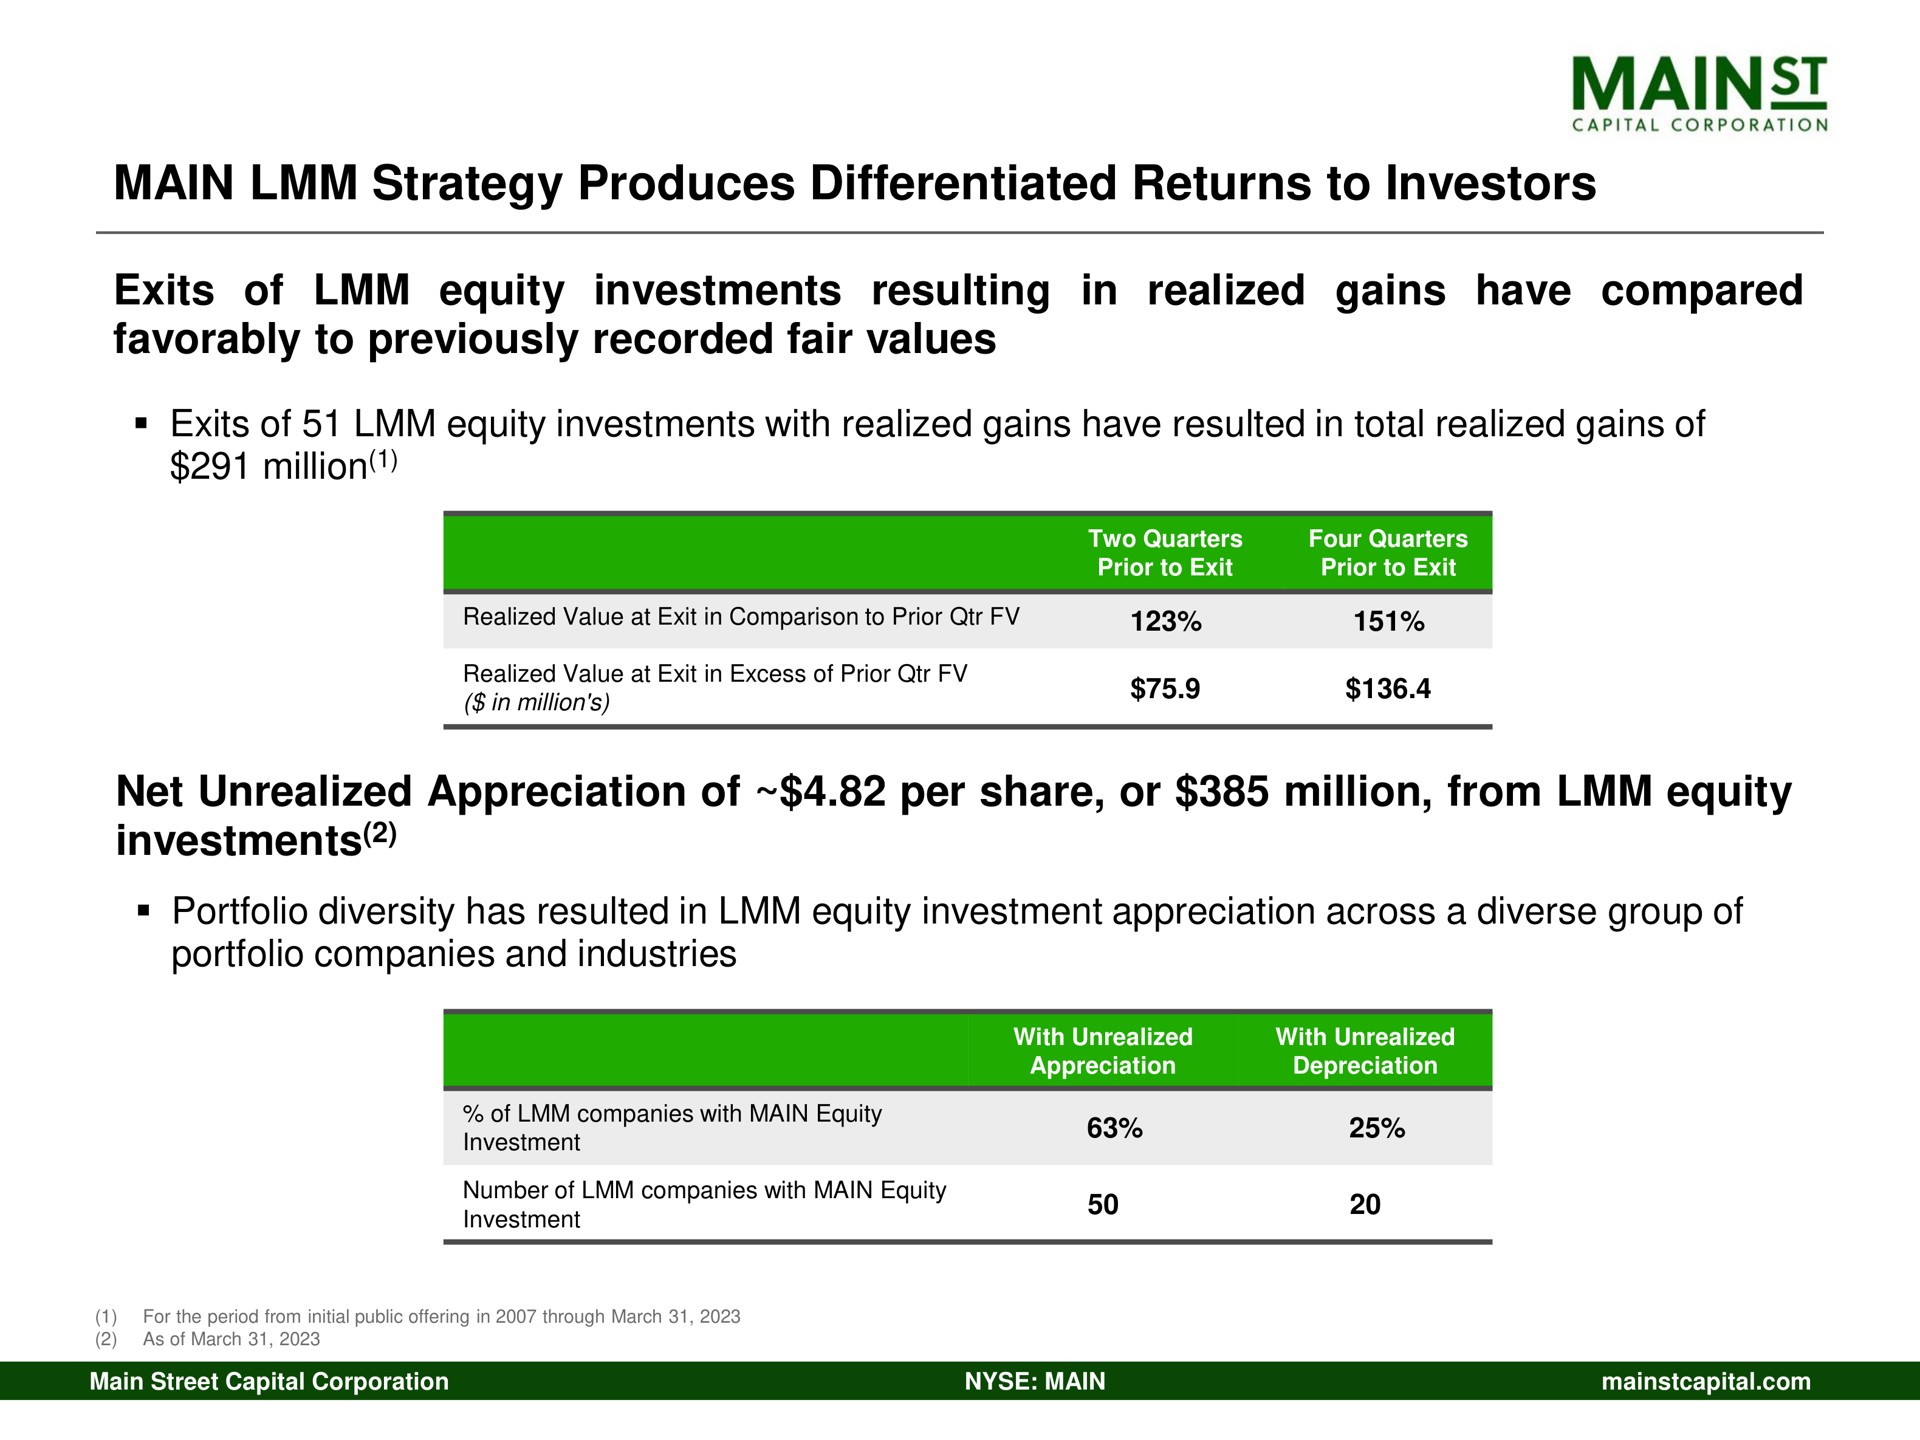 main strategy produces differentiated returns to investors exits of equity investments resulting in realized gains have compared favorably to previously recorded fair values net unrealized appreciation of per share or million from equity investments | Main Street Capital